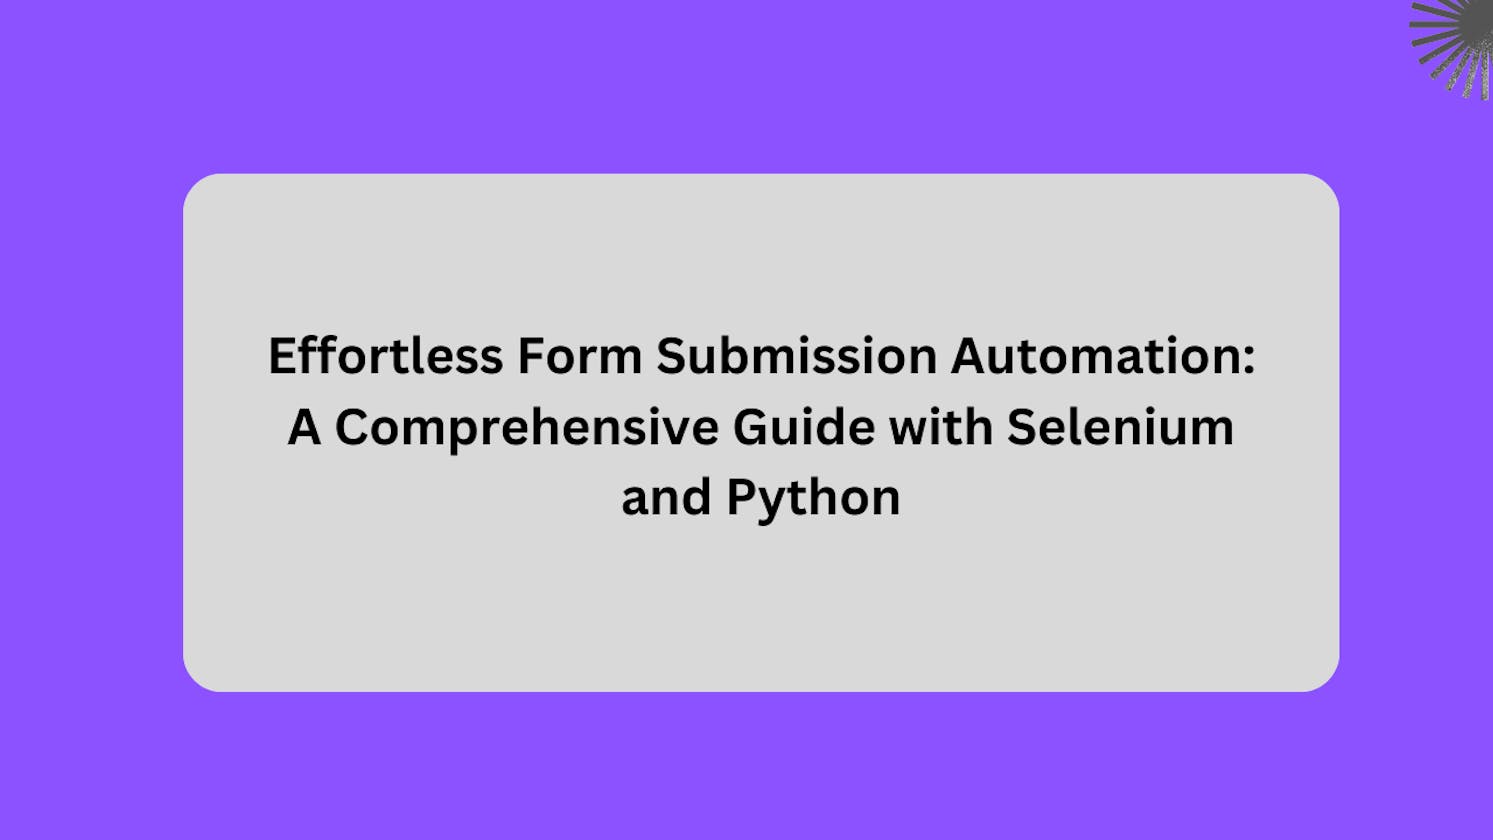 Effortless Form Submission Automation: A Comprehensive Guide with Selenium and Python